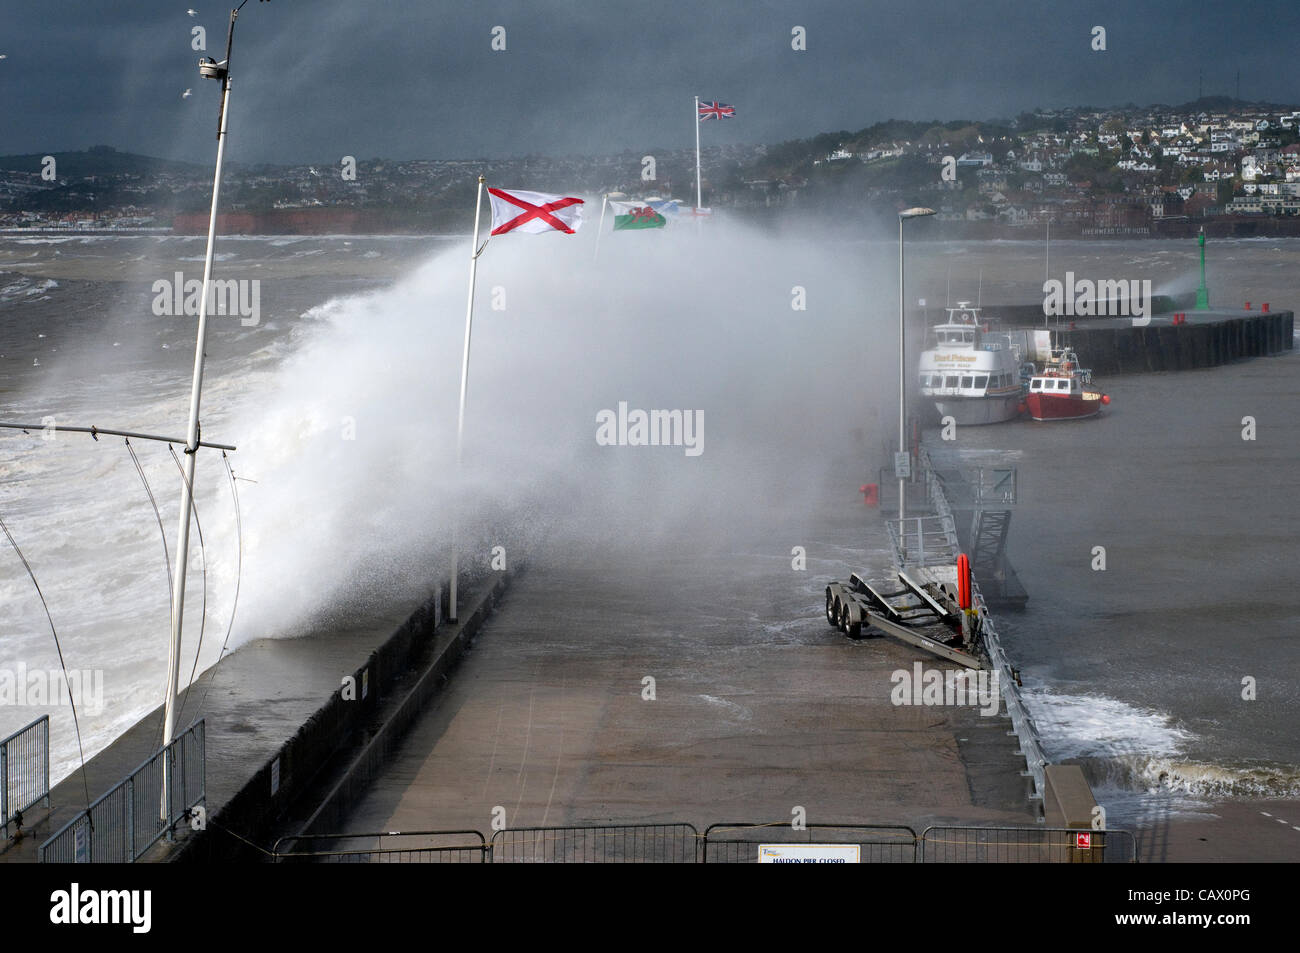 Torquay, UK. 30 April, 2012. High waves crash over the sea wall at Torquay, Devon, as storms and rain hit the South Coast of the UK.England Stock Photo